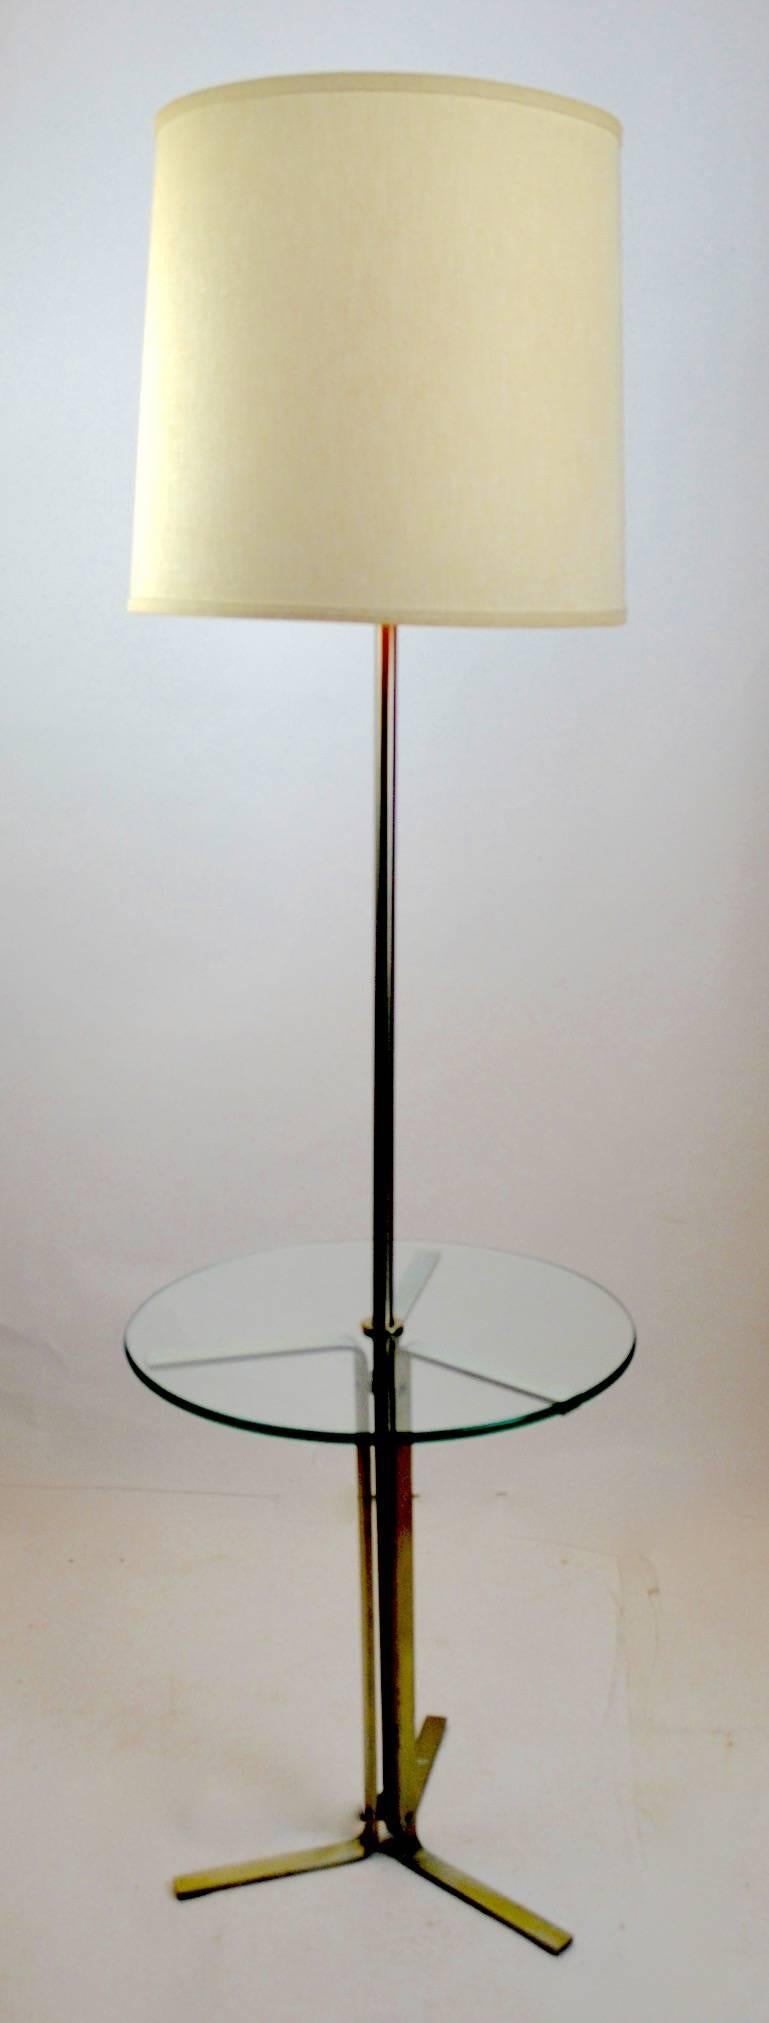 20th Century Floor Table Lamp by the Laurel Lamp Company